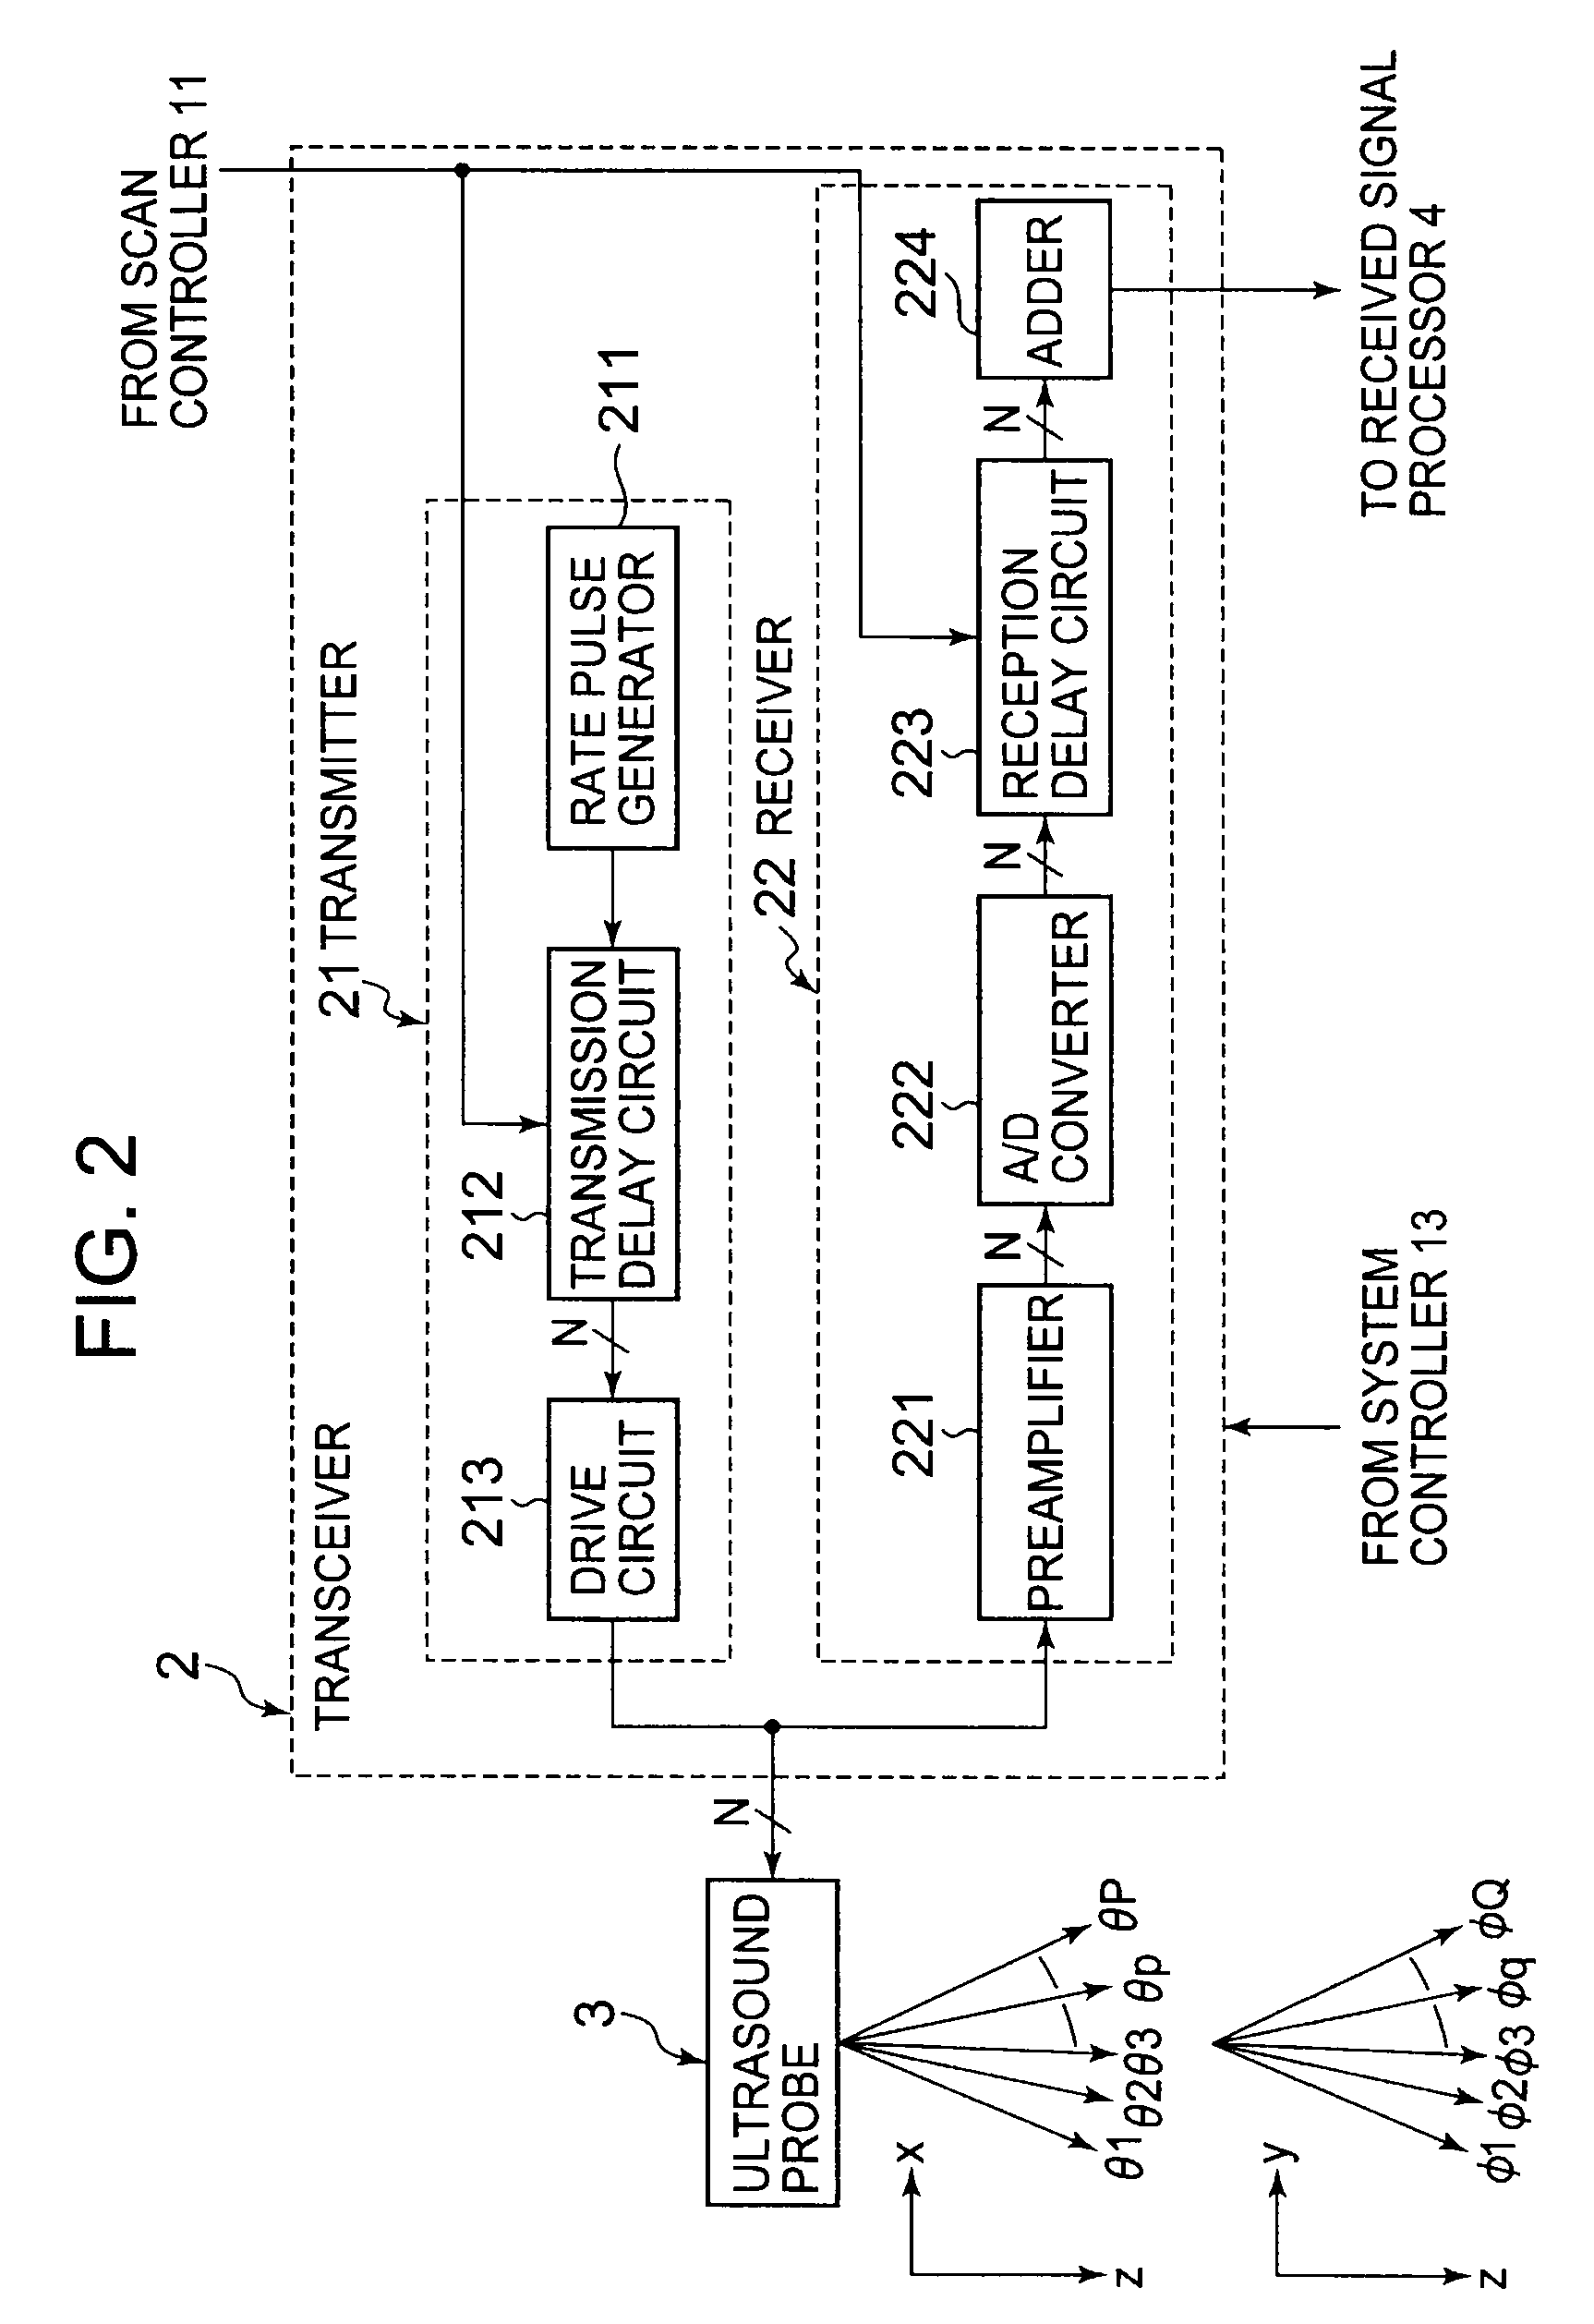 Ultrasound imaging apparatus and method for generating ultrasound image